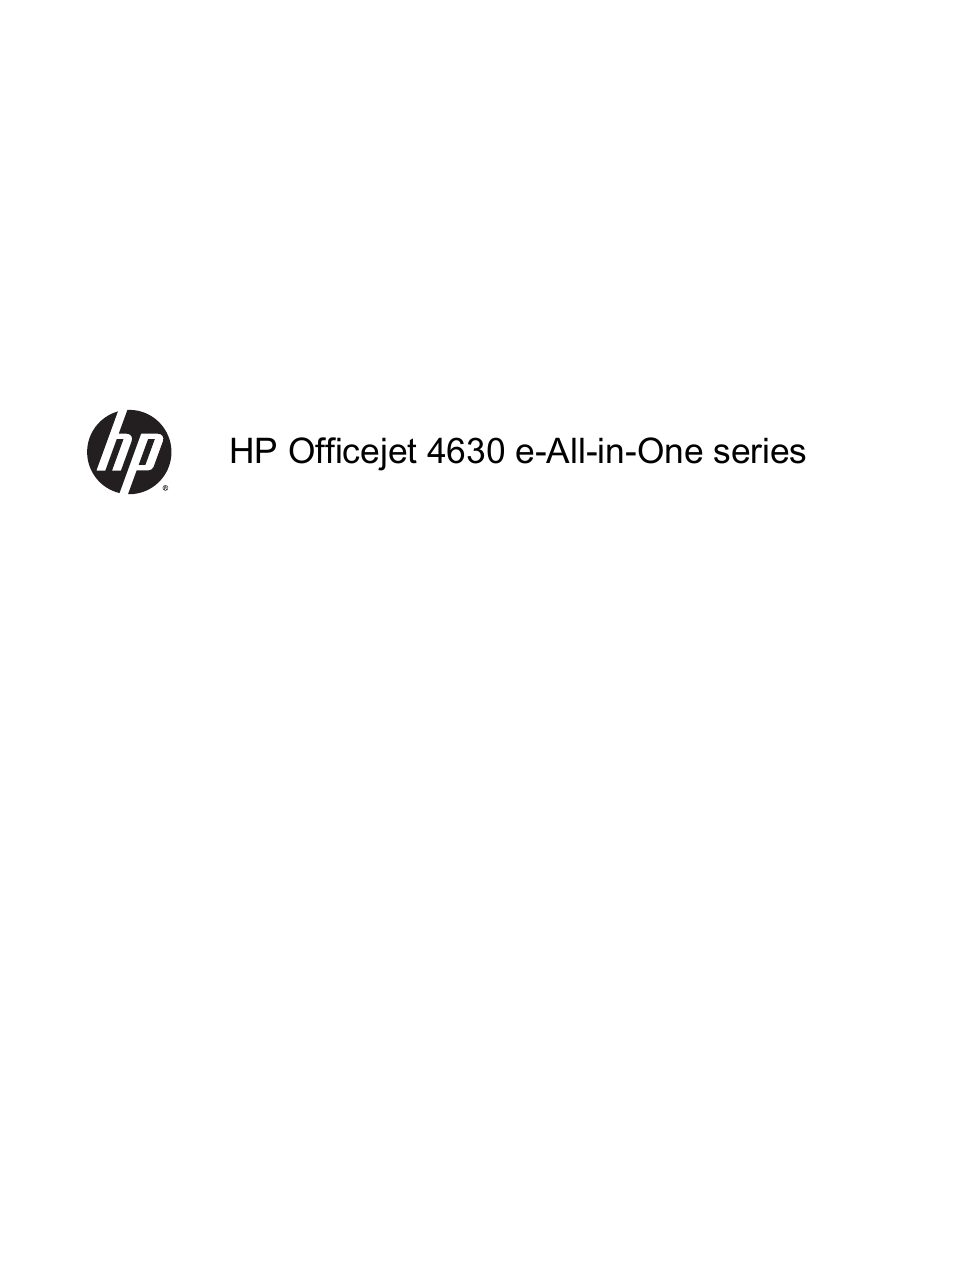 Hp Officejet 7410 All-in-one User Manual